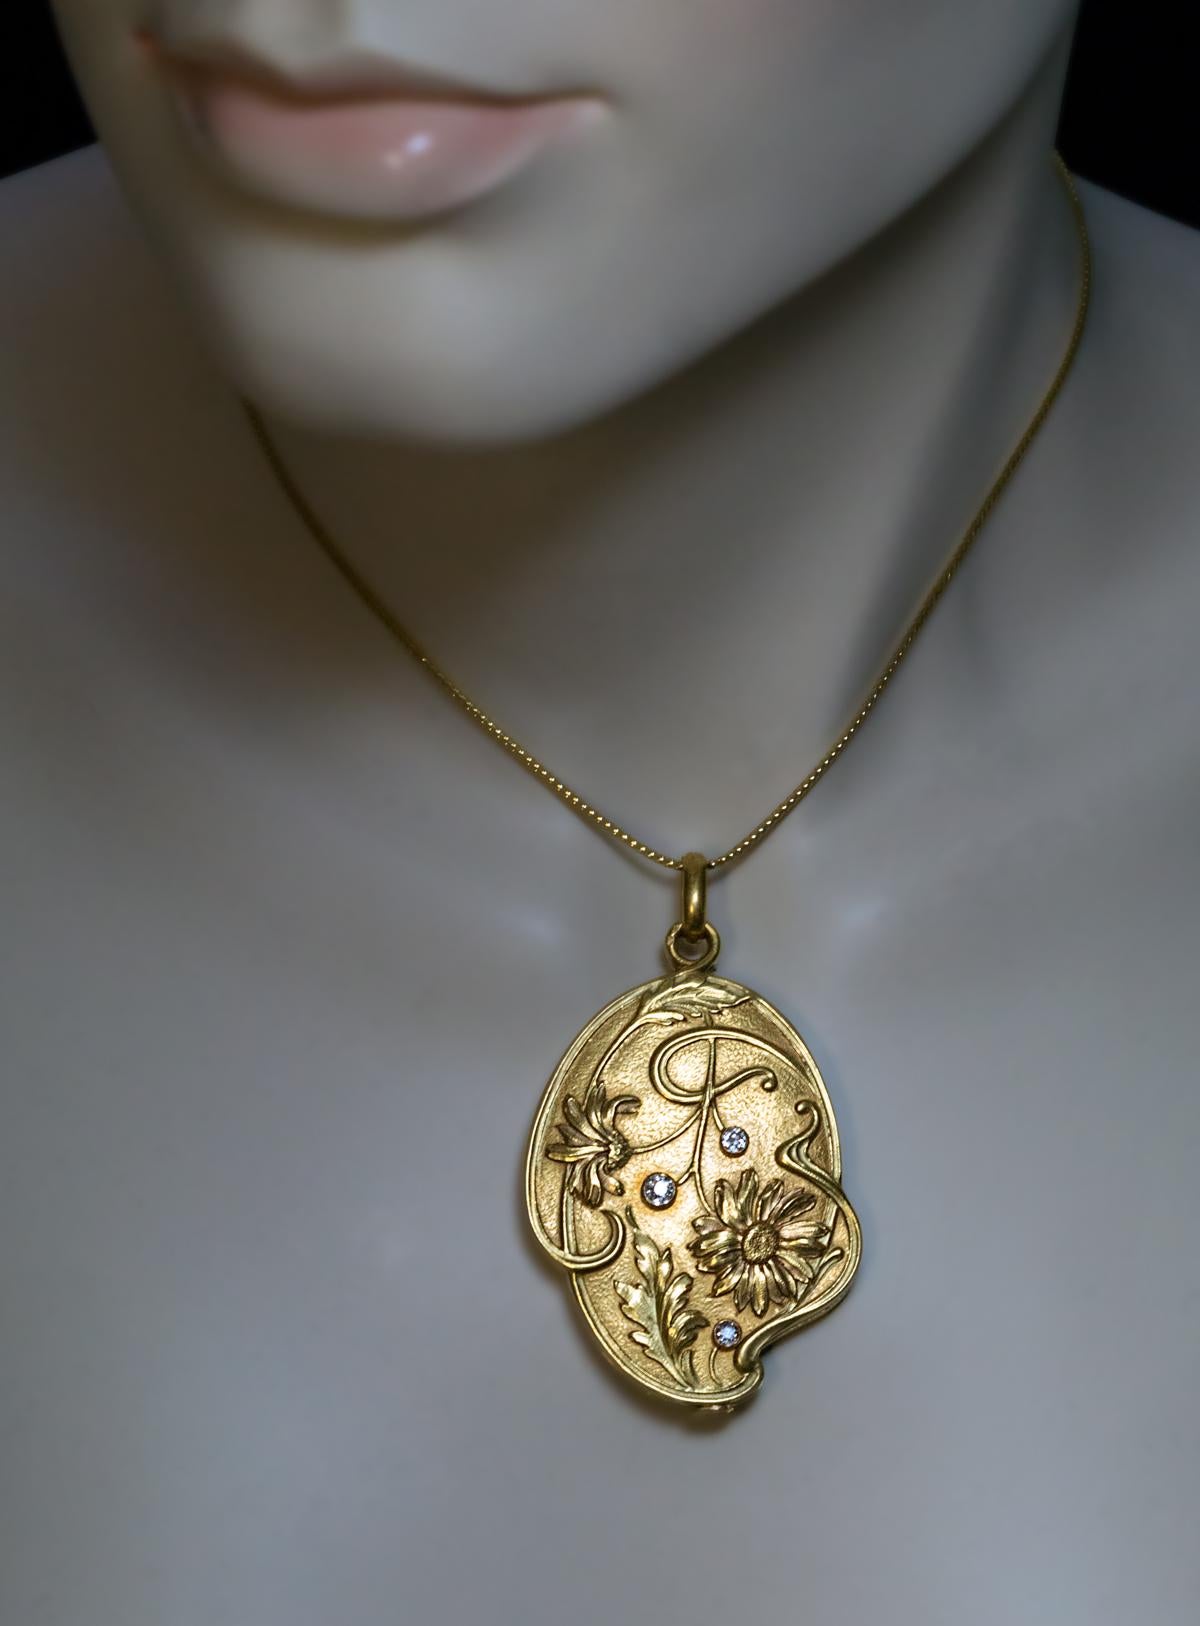 This large antique French 18K gold locket pendant is superbly modeled in the Art Nouveau style of the 1890s – early 1900s. The cover is finely chased in high relief with flowers accented with three sparkling old mine cut diamonds. The interior is